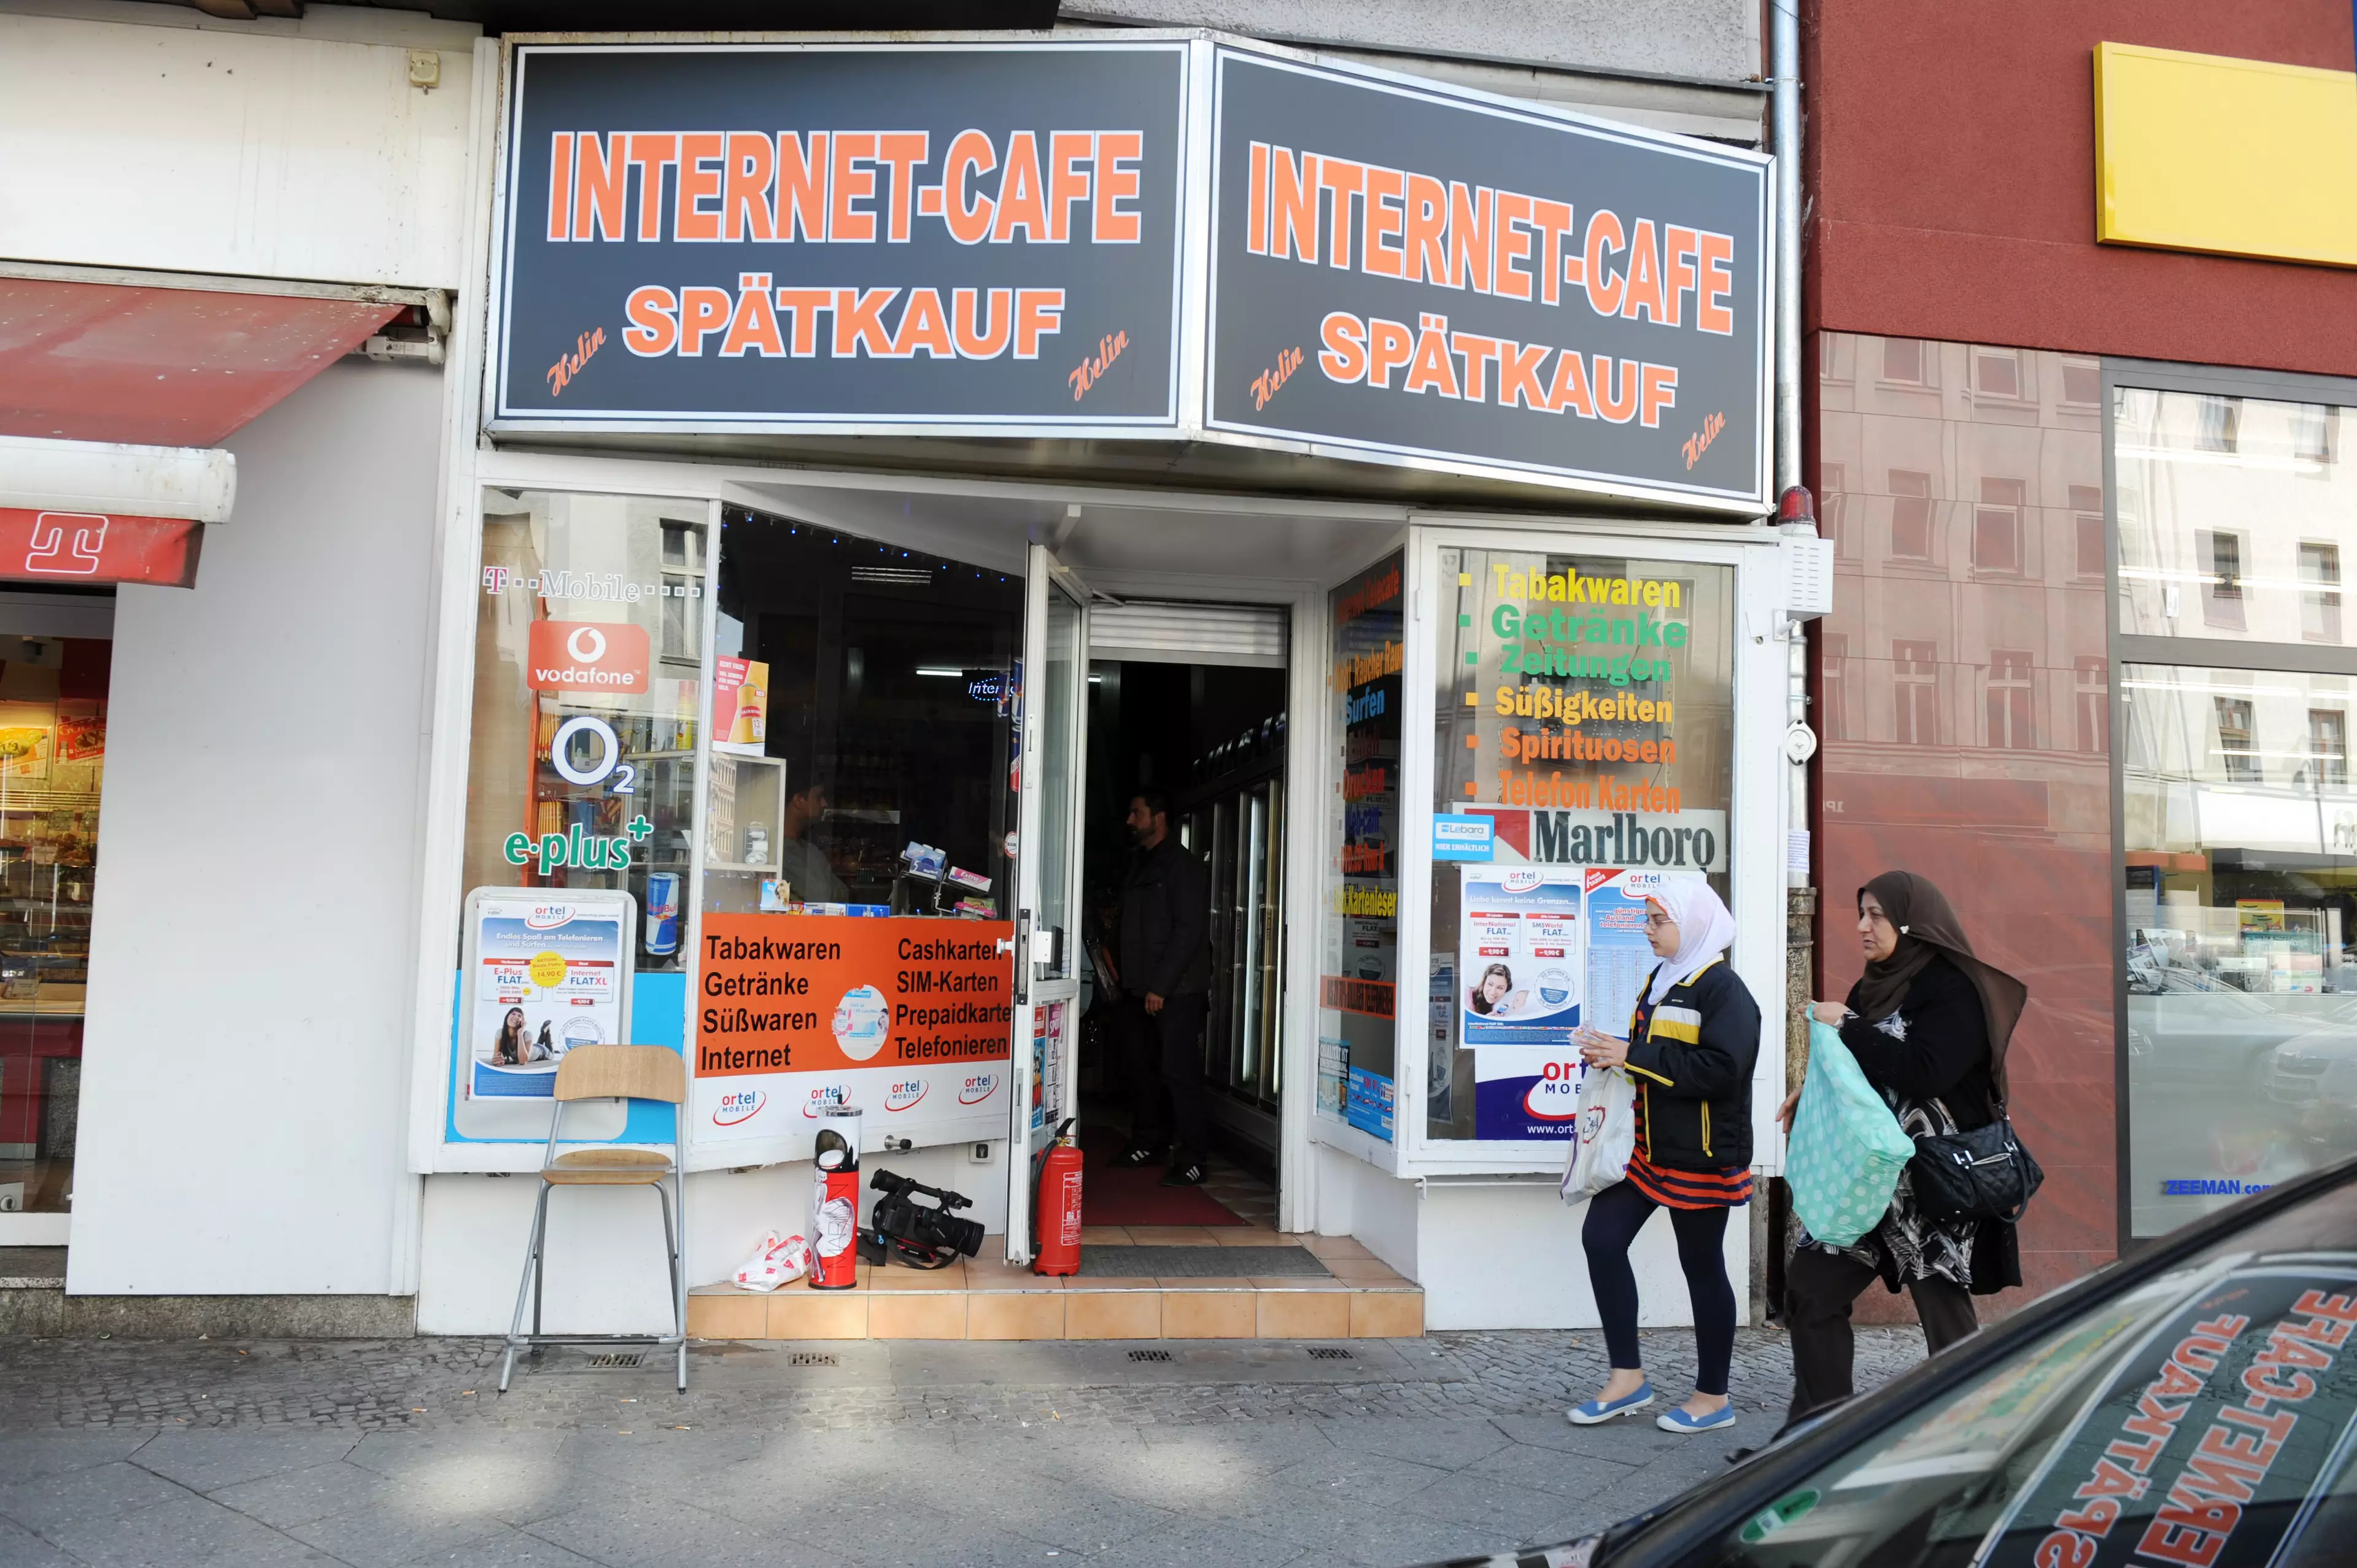 The internet cafe where Magnotta was apprehended.